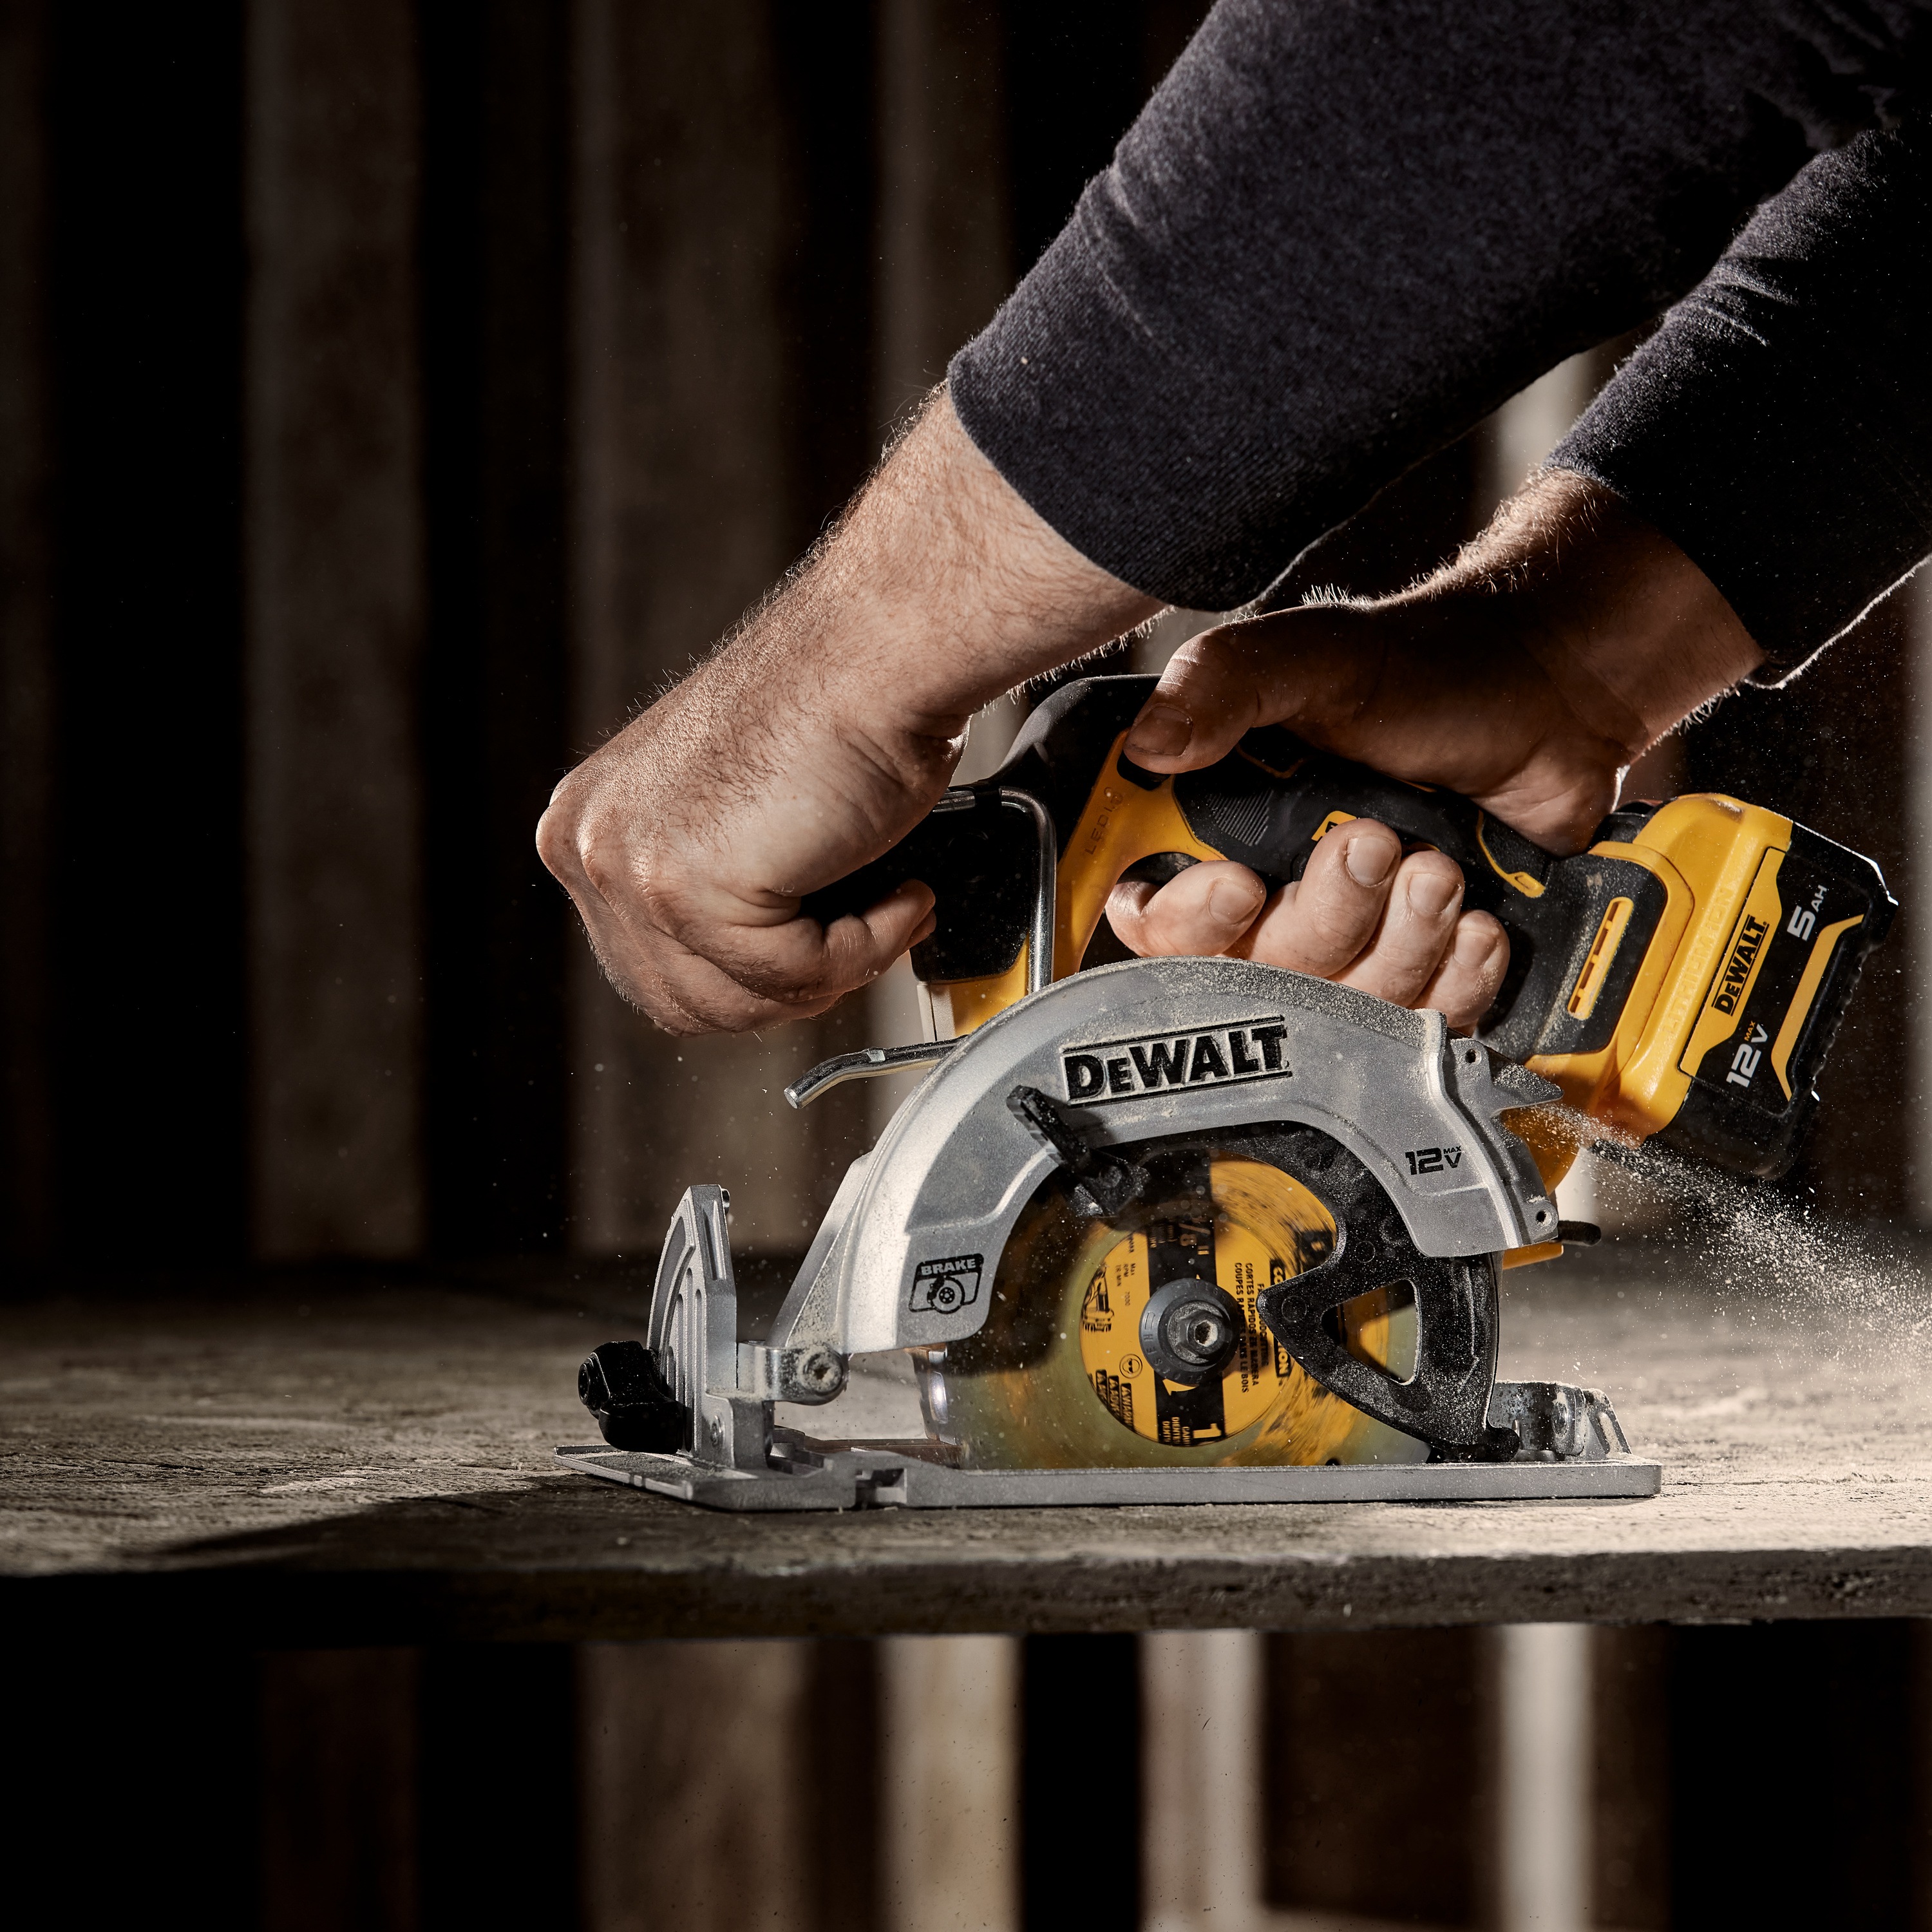 Xtreme 12 volt 5 and three eighths inch brushless cordless circular saw tool being used to cut wood.